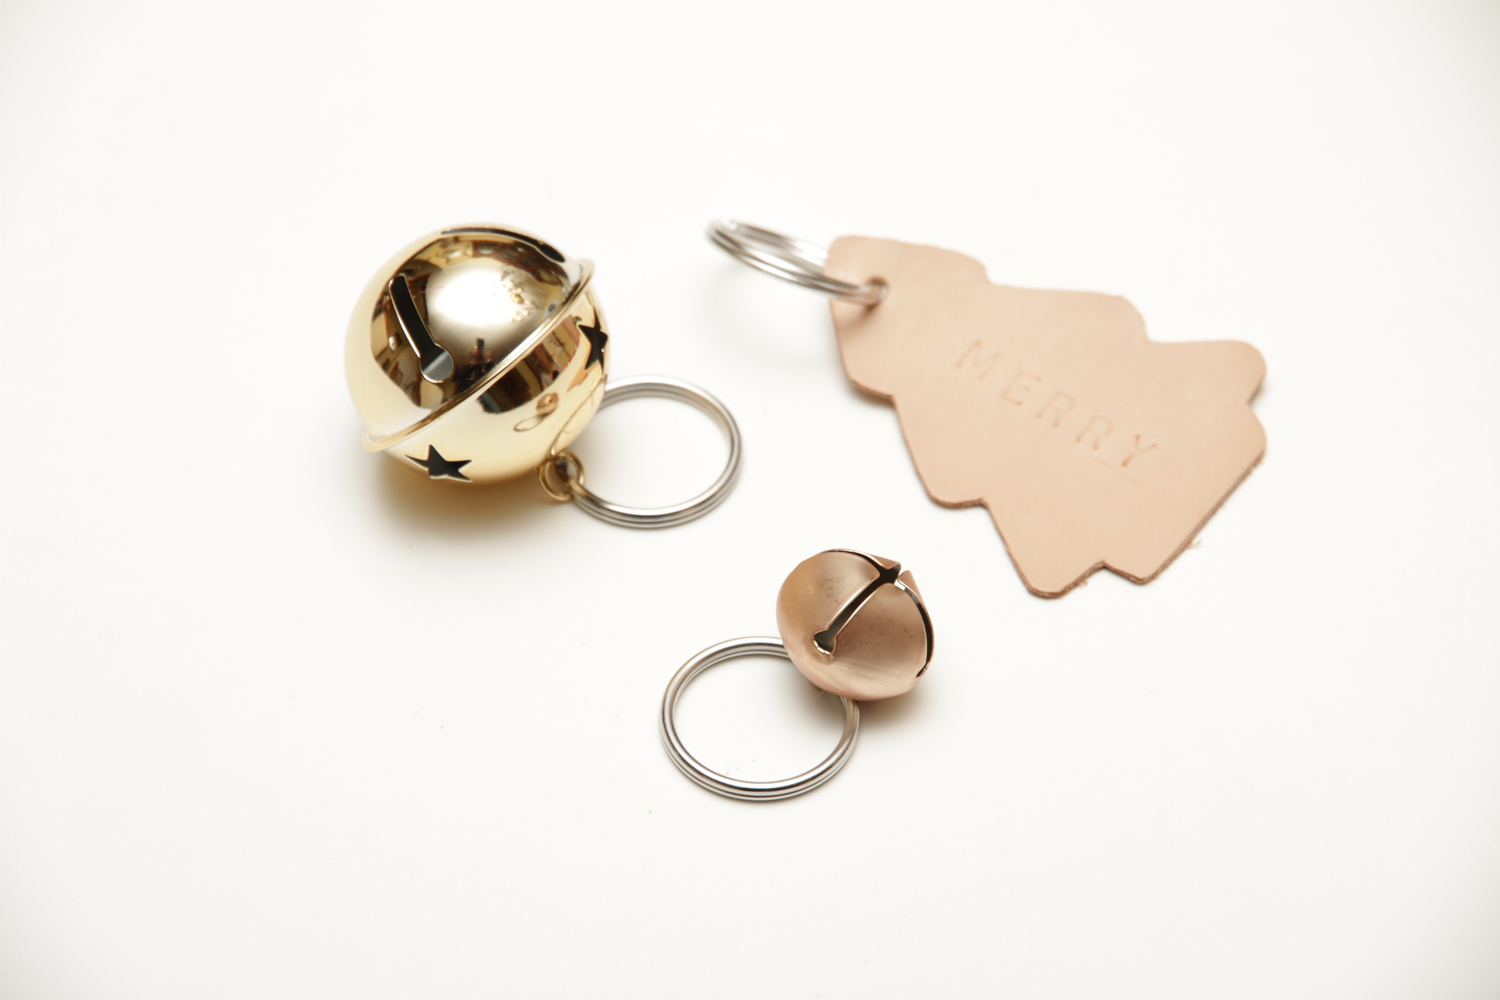 Jingle bell key ring and leather tree key ring